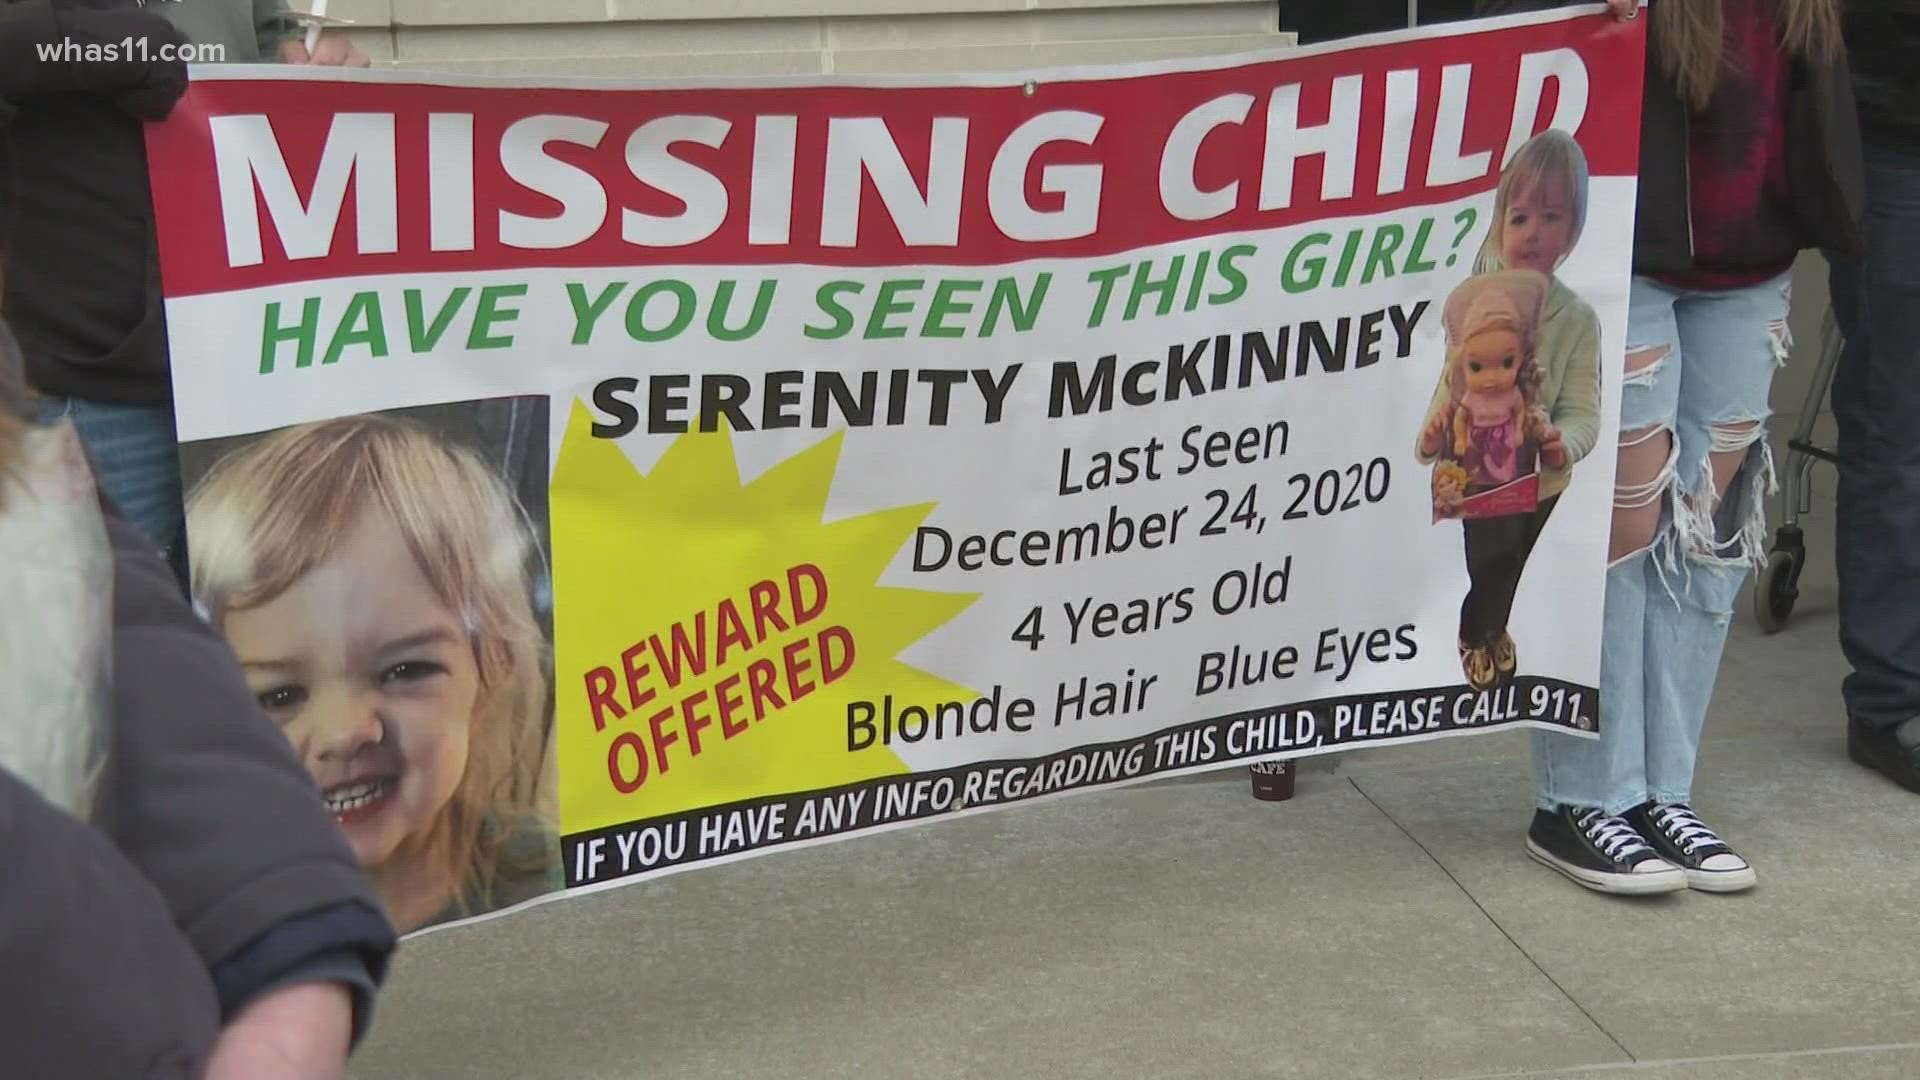 Dozens gathered at the steps of the Shelby County Courthouse in prayer, hoping that Serenity McKinney comes home safe.